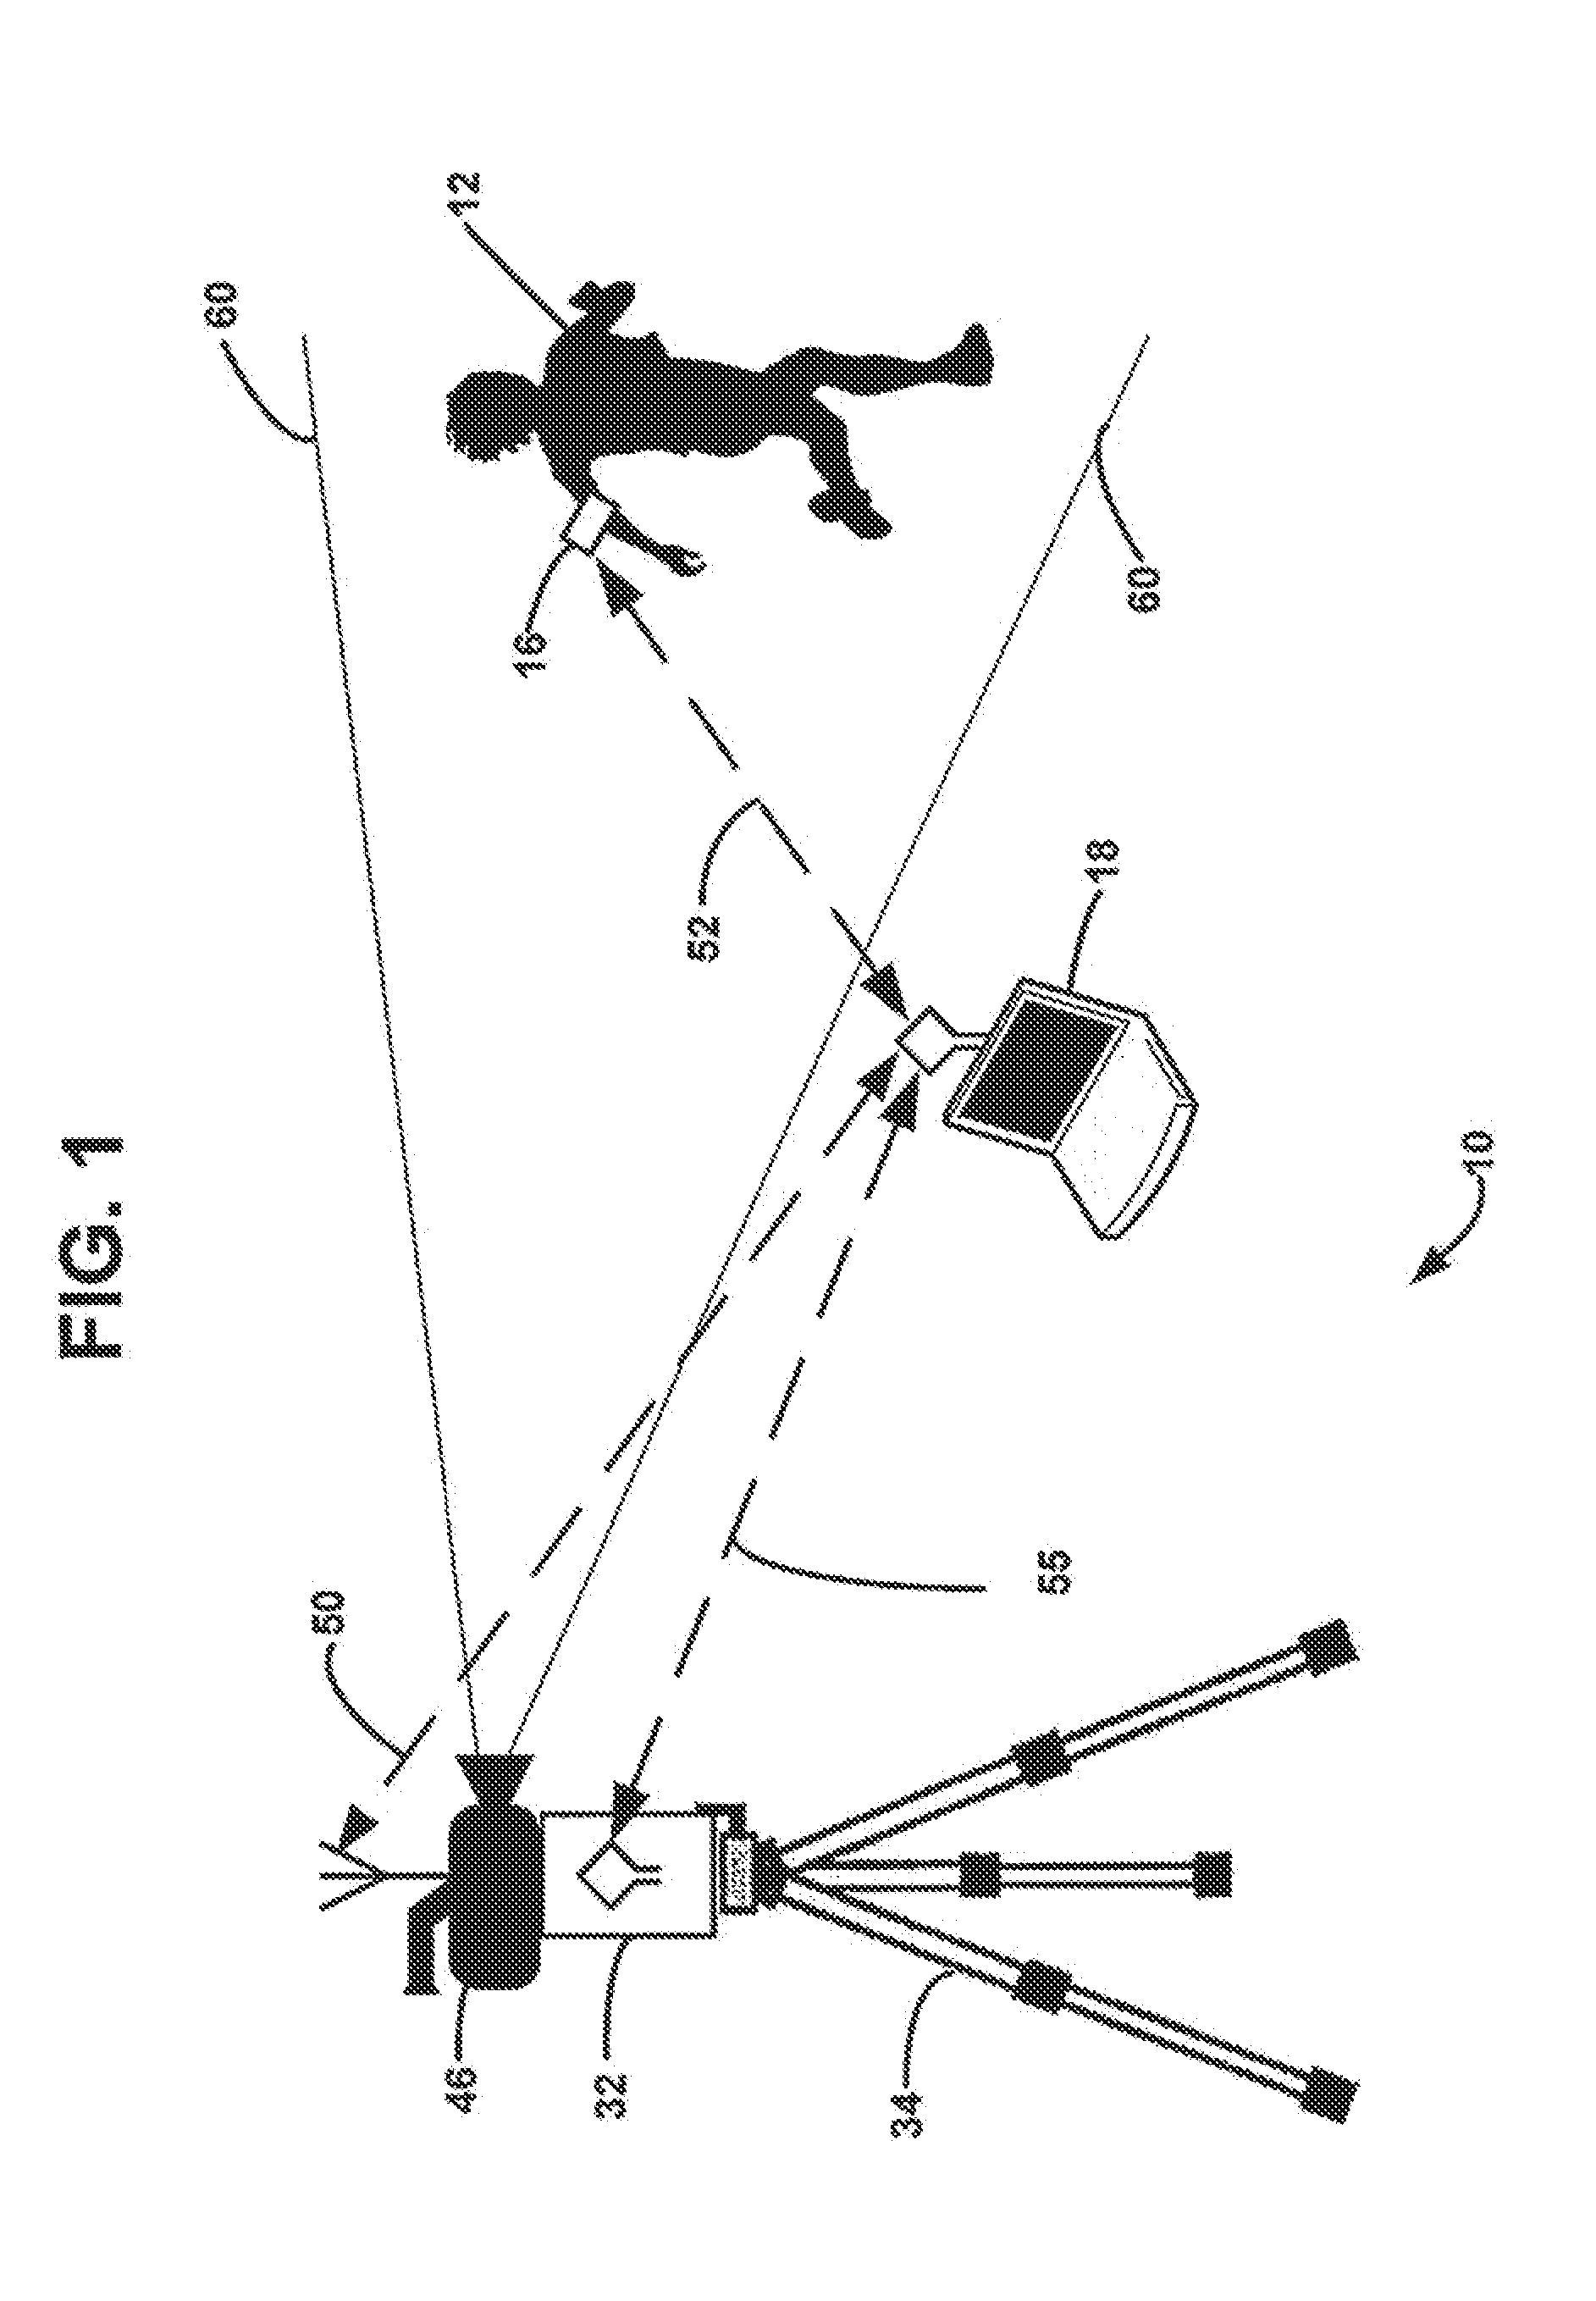 System and method for video recording and webcasting sporting events